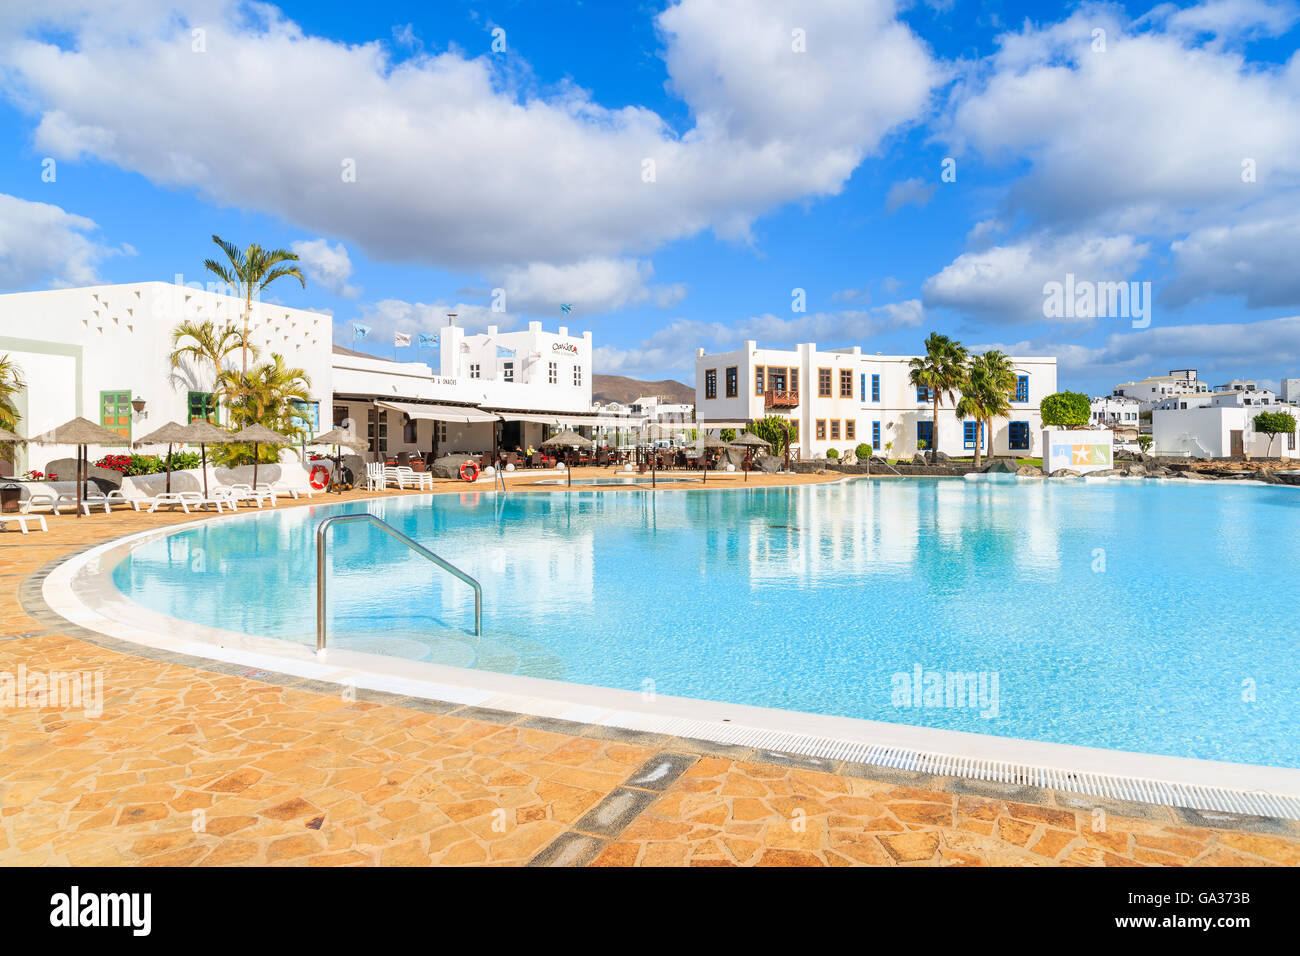 PLAYA BLANCA, LANZAROTE ISLAND - JAN 17, 2015: swimming pool of luxury apartment complex built in traditional Canary style on Lanzarote island. Canary Islands are popular holiday destination. Stock Photo